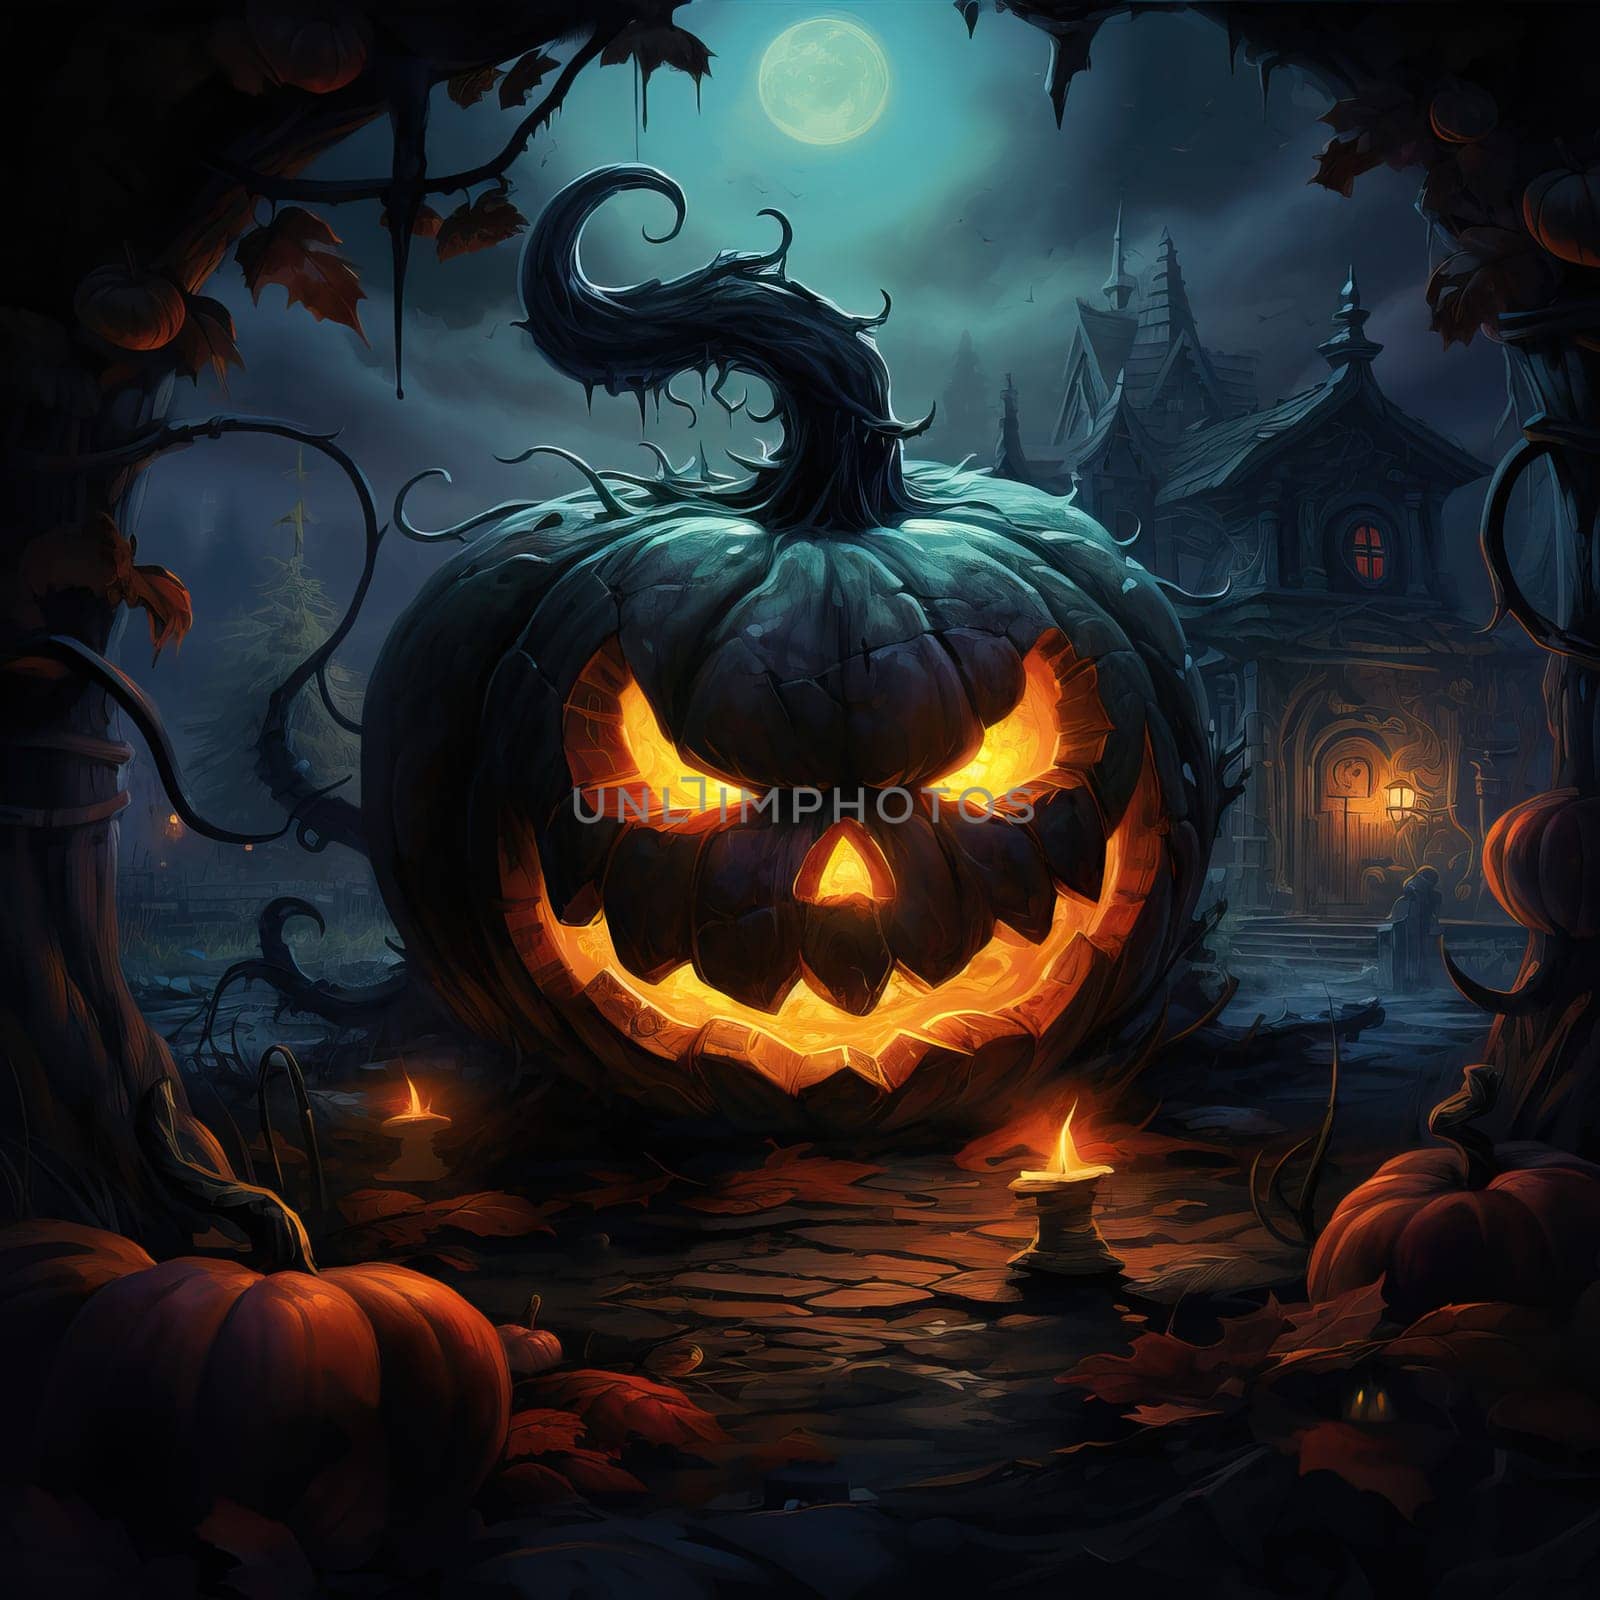 Halloween concept - Halloween jack-o-lantern with glowing eyes, and spooky haunted house at night illustration